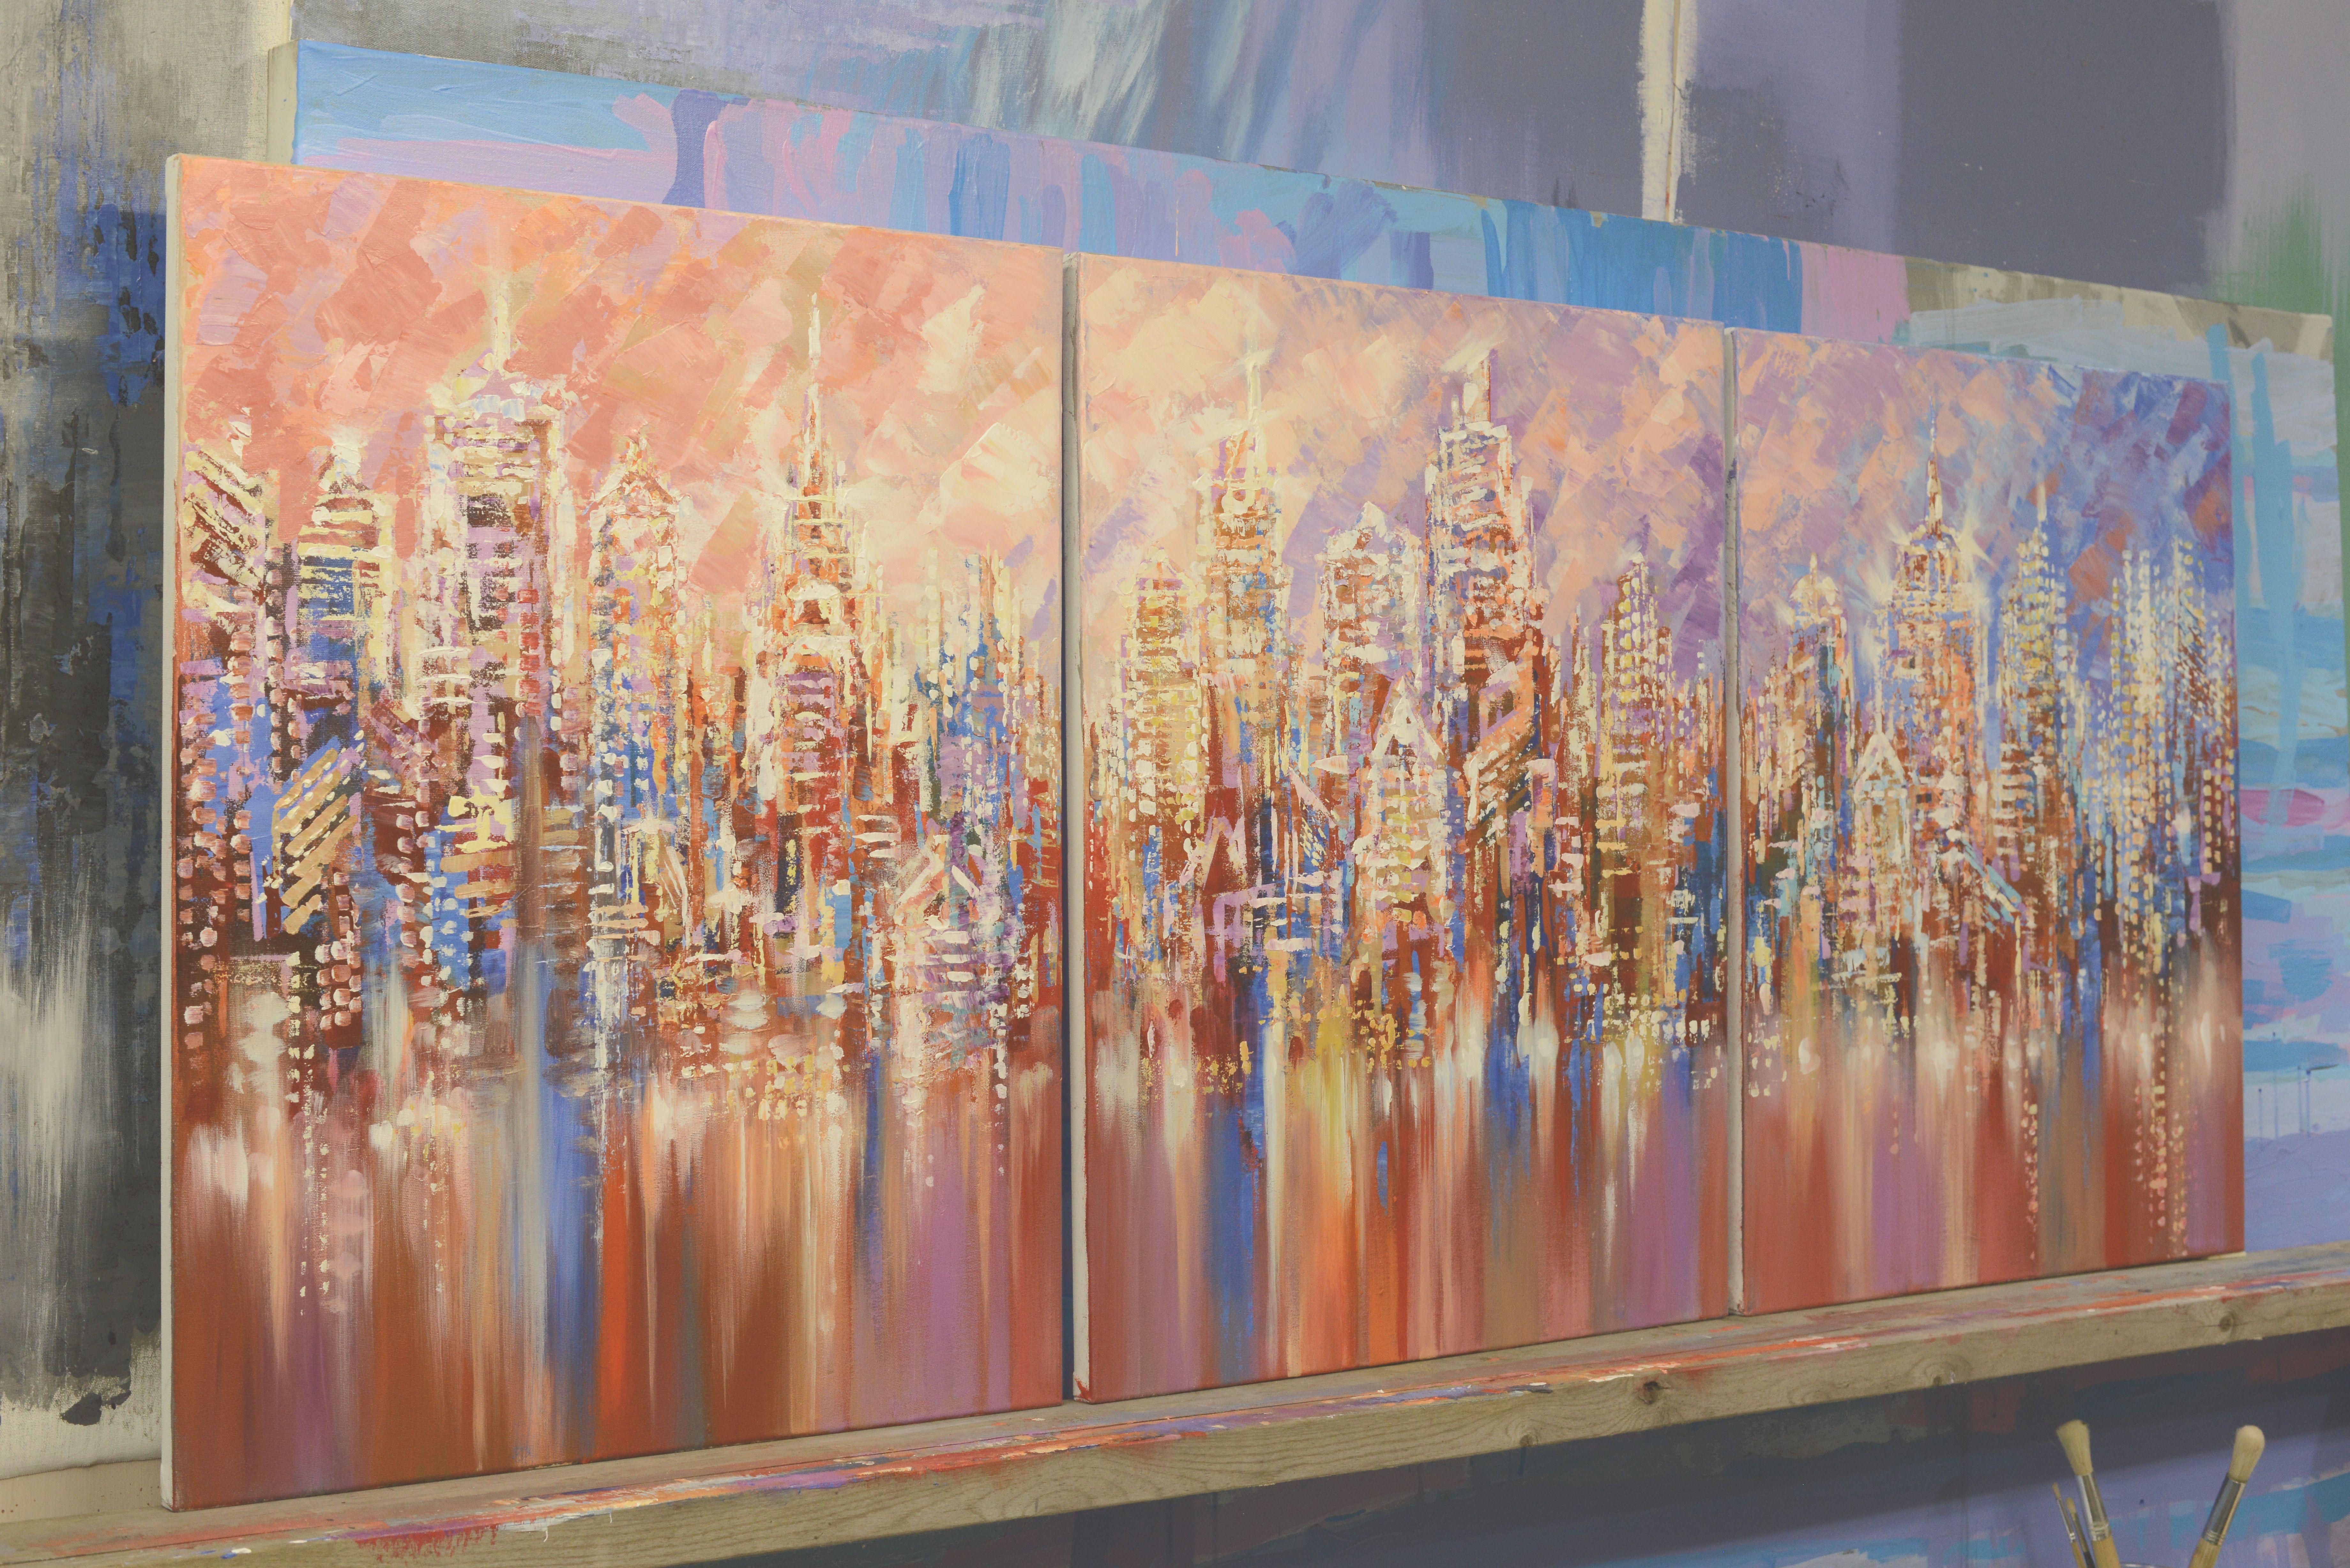 This is an original large cityscape painting (triptych) on 3 panels of mounted canvas, each 22